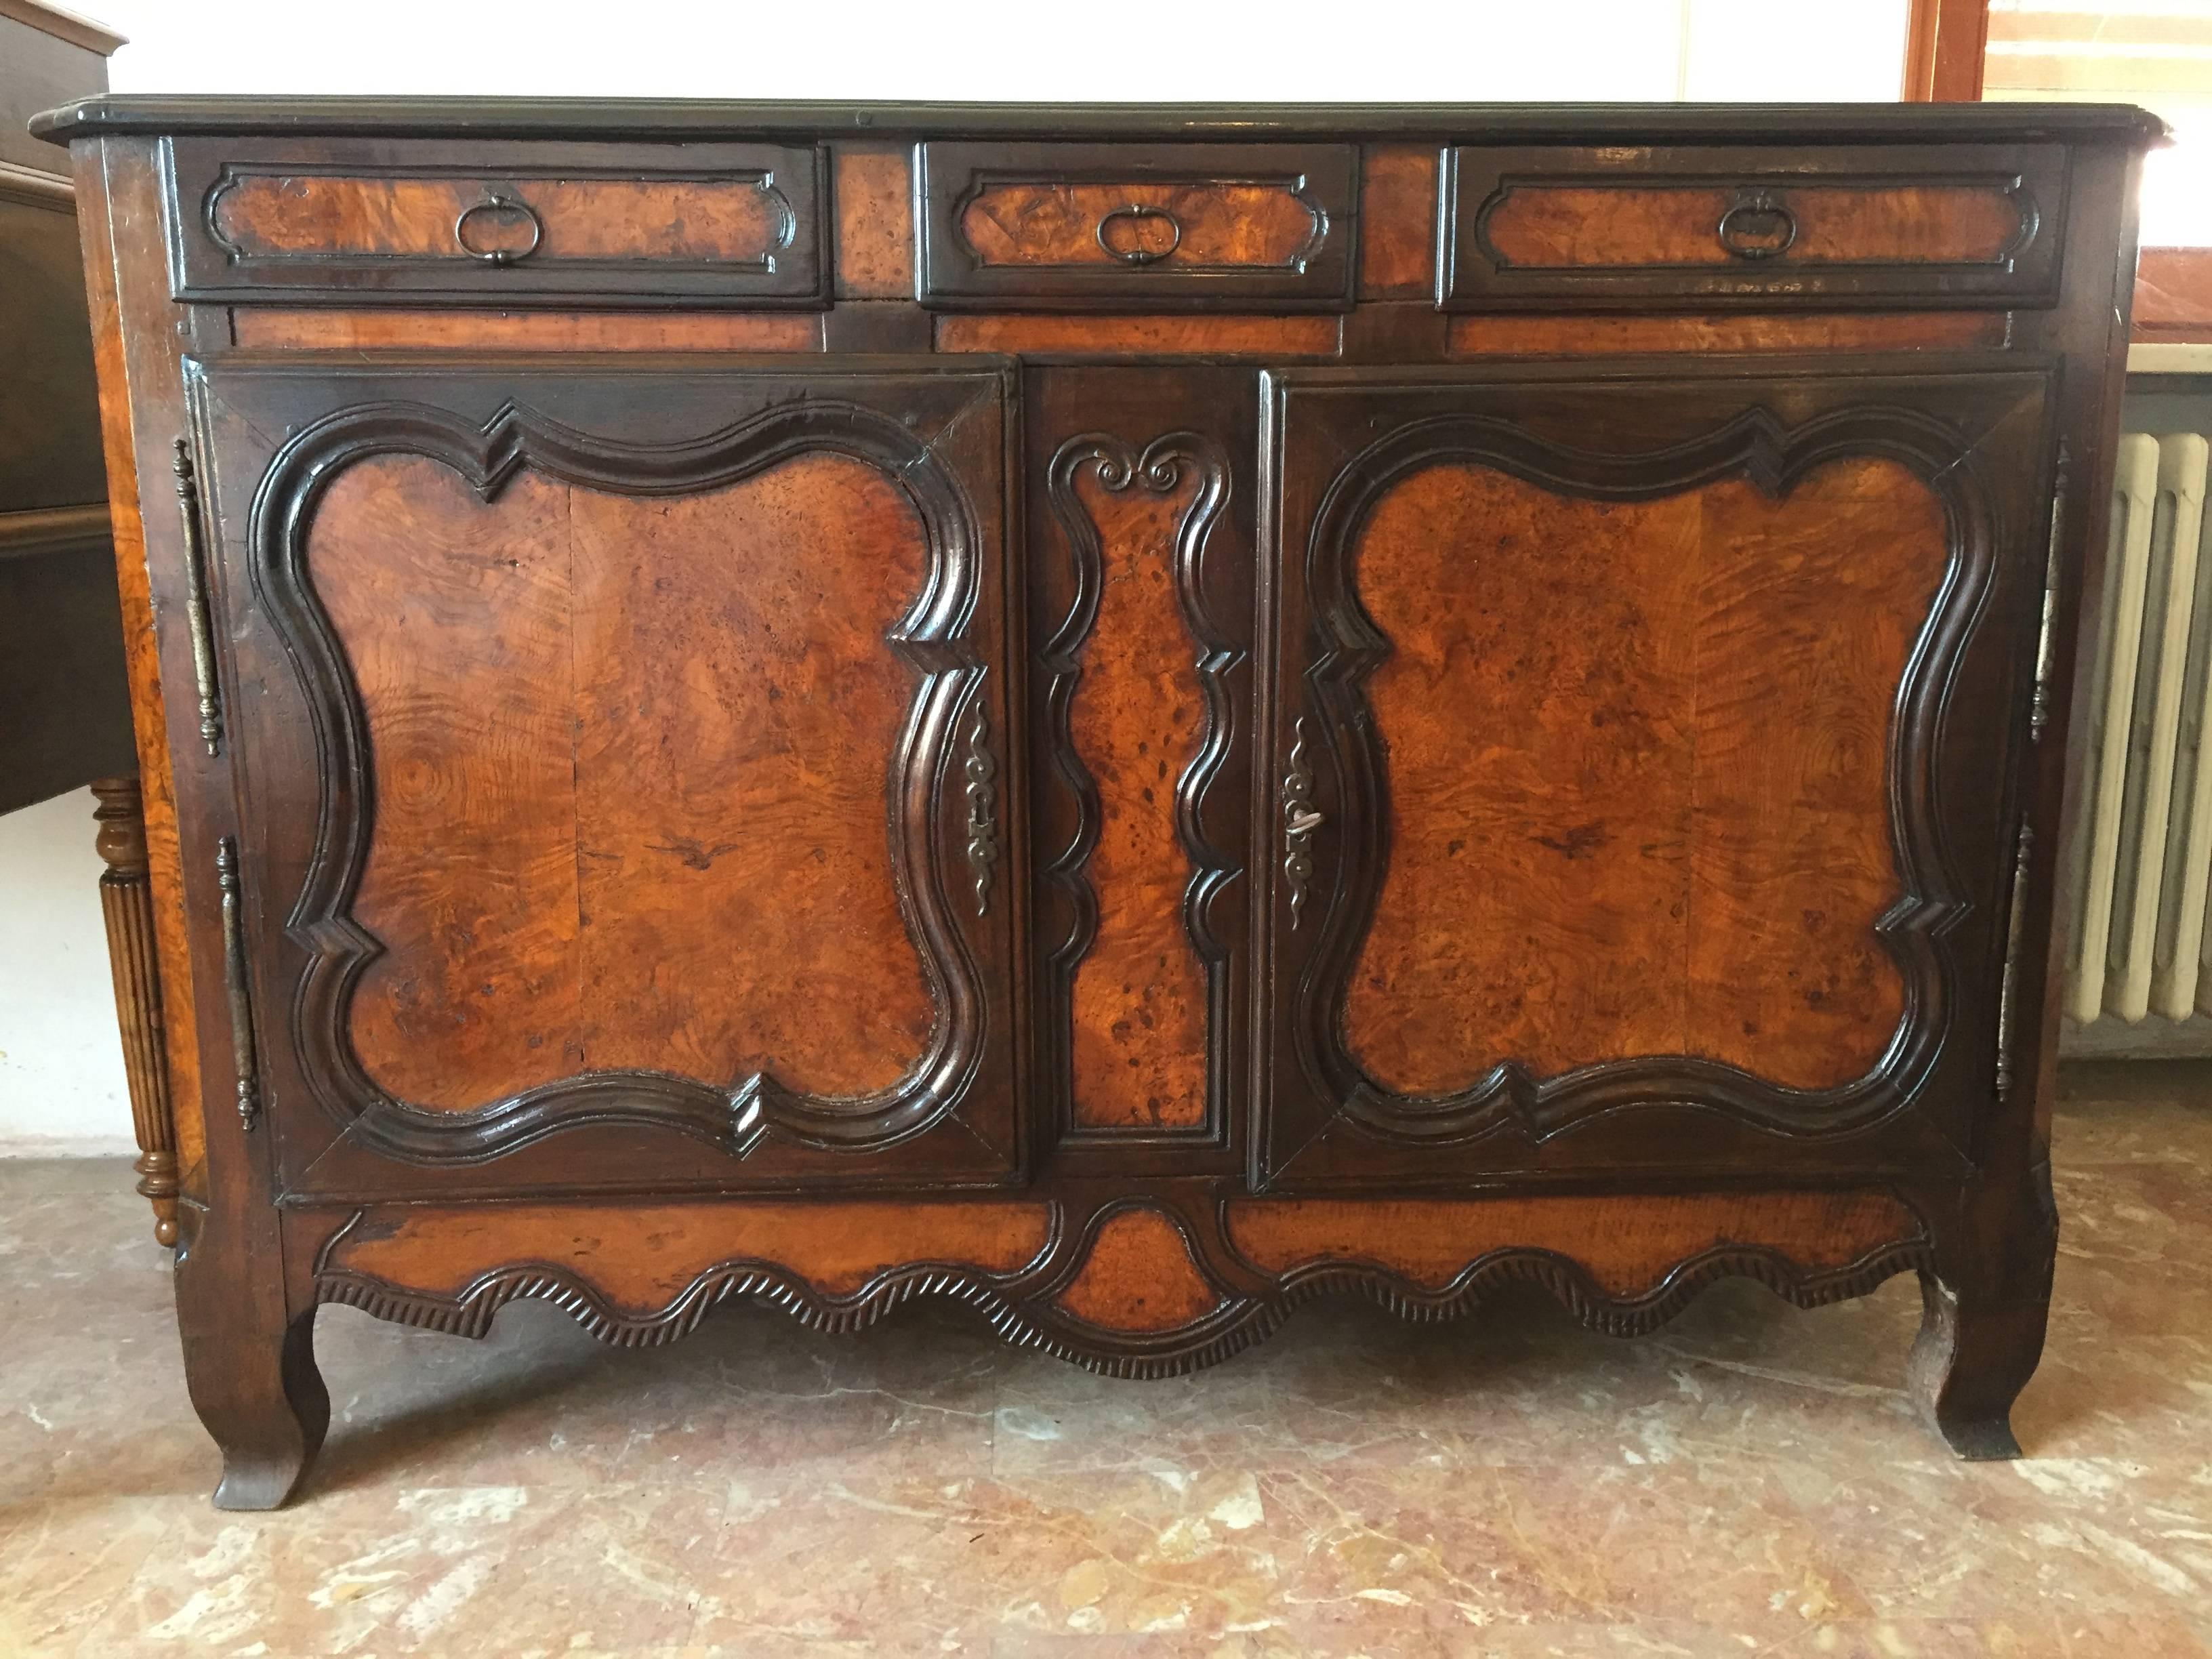 Beautiful buffet with carved doors and wavy apron.
It was built in France, area of Bresse with different kind of wood, fruitwood and
elmwood to create two toned and two textured effect that is unequalled in the world of furniture.
Gorgeous warm